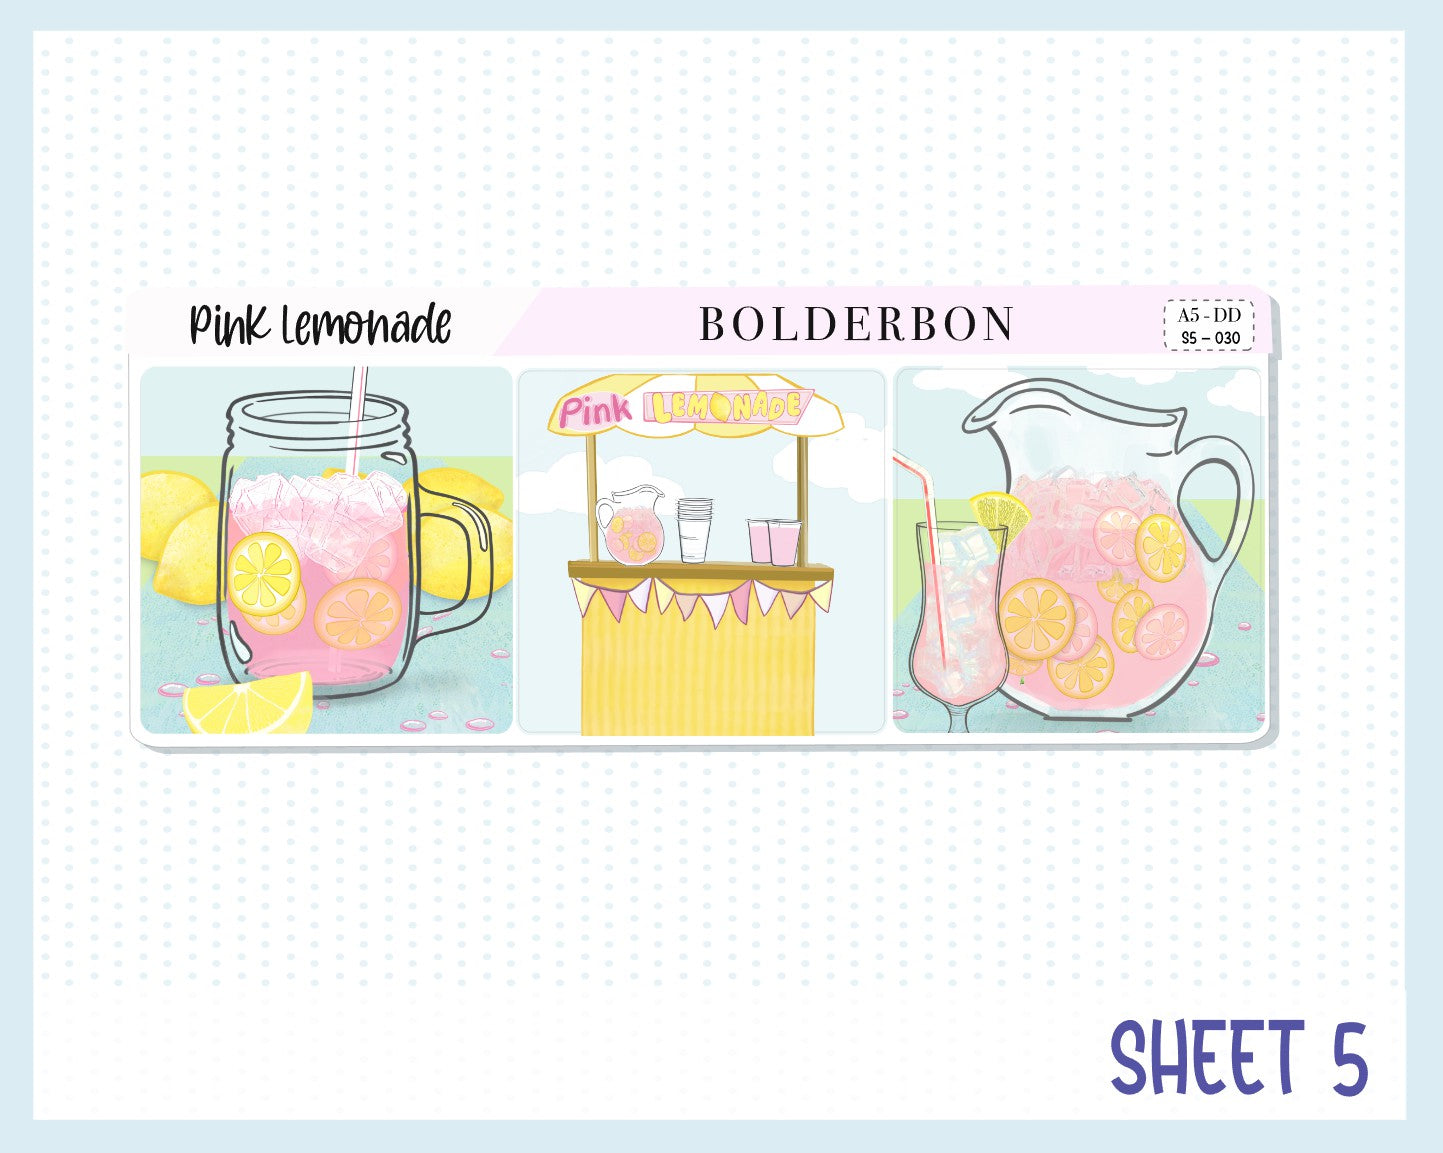 PINK LEMONADE || A5 Daily Duo Planner Sticker Kit